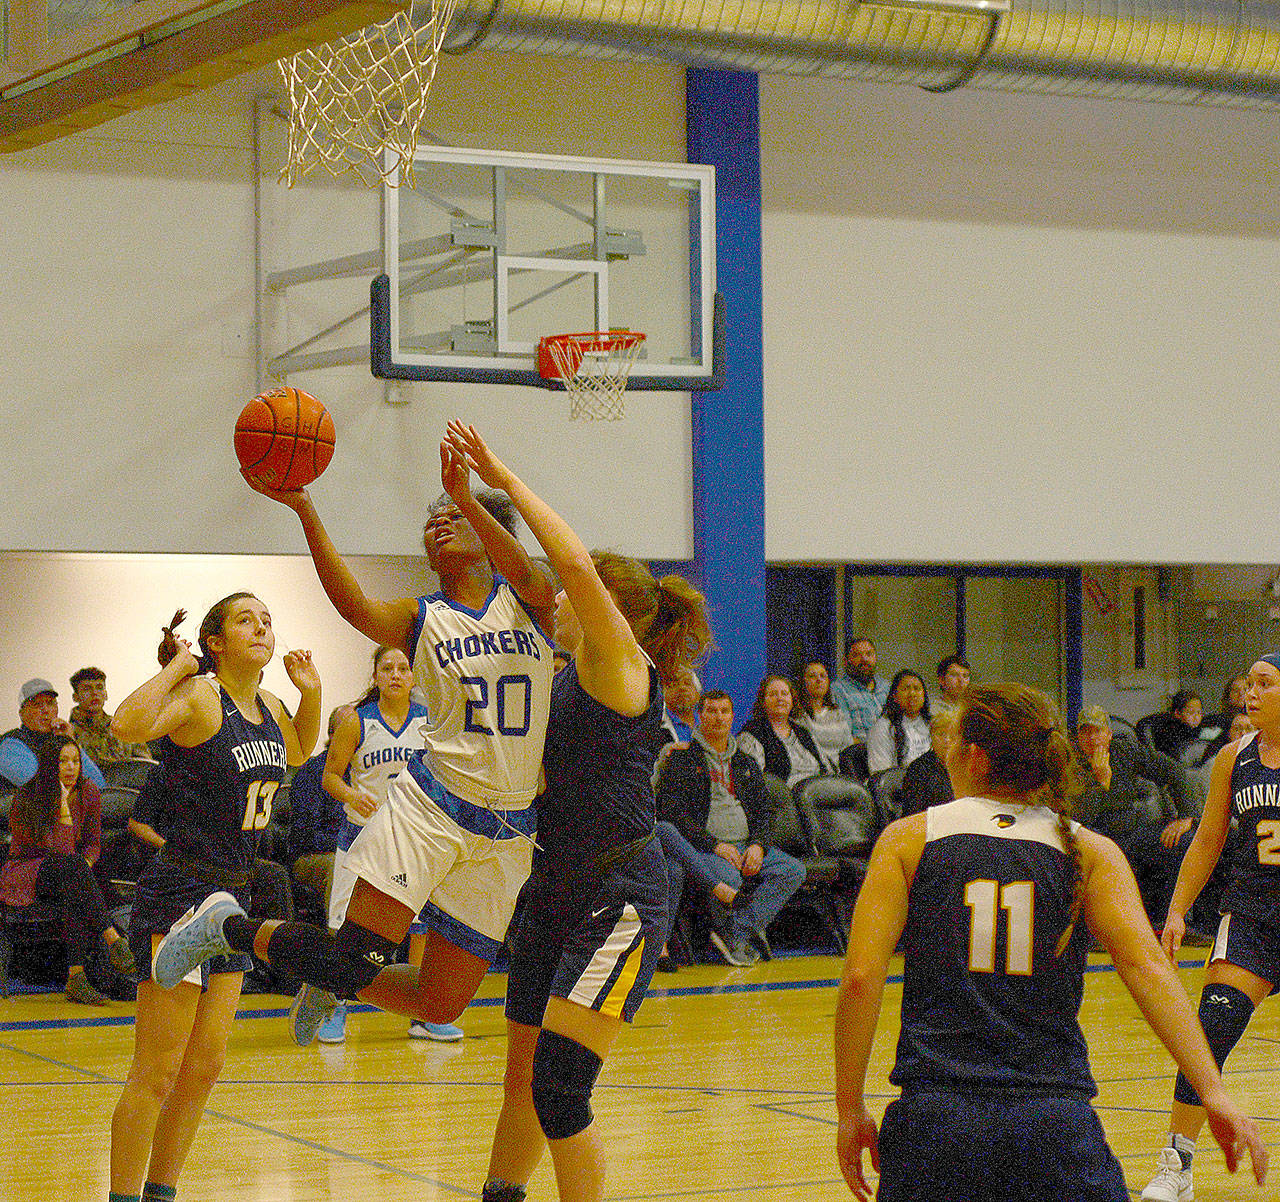 Alexia Thrower finishes at the rim in a game at Choker Gym. Thrower leads the NWAC in scoring averaging 26.4 points per game. (Hasani Grayson | The Daily World)